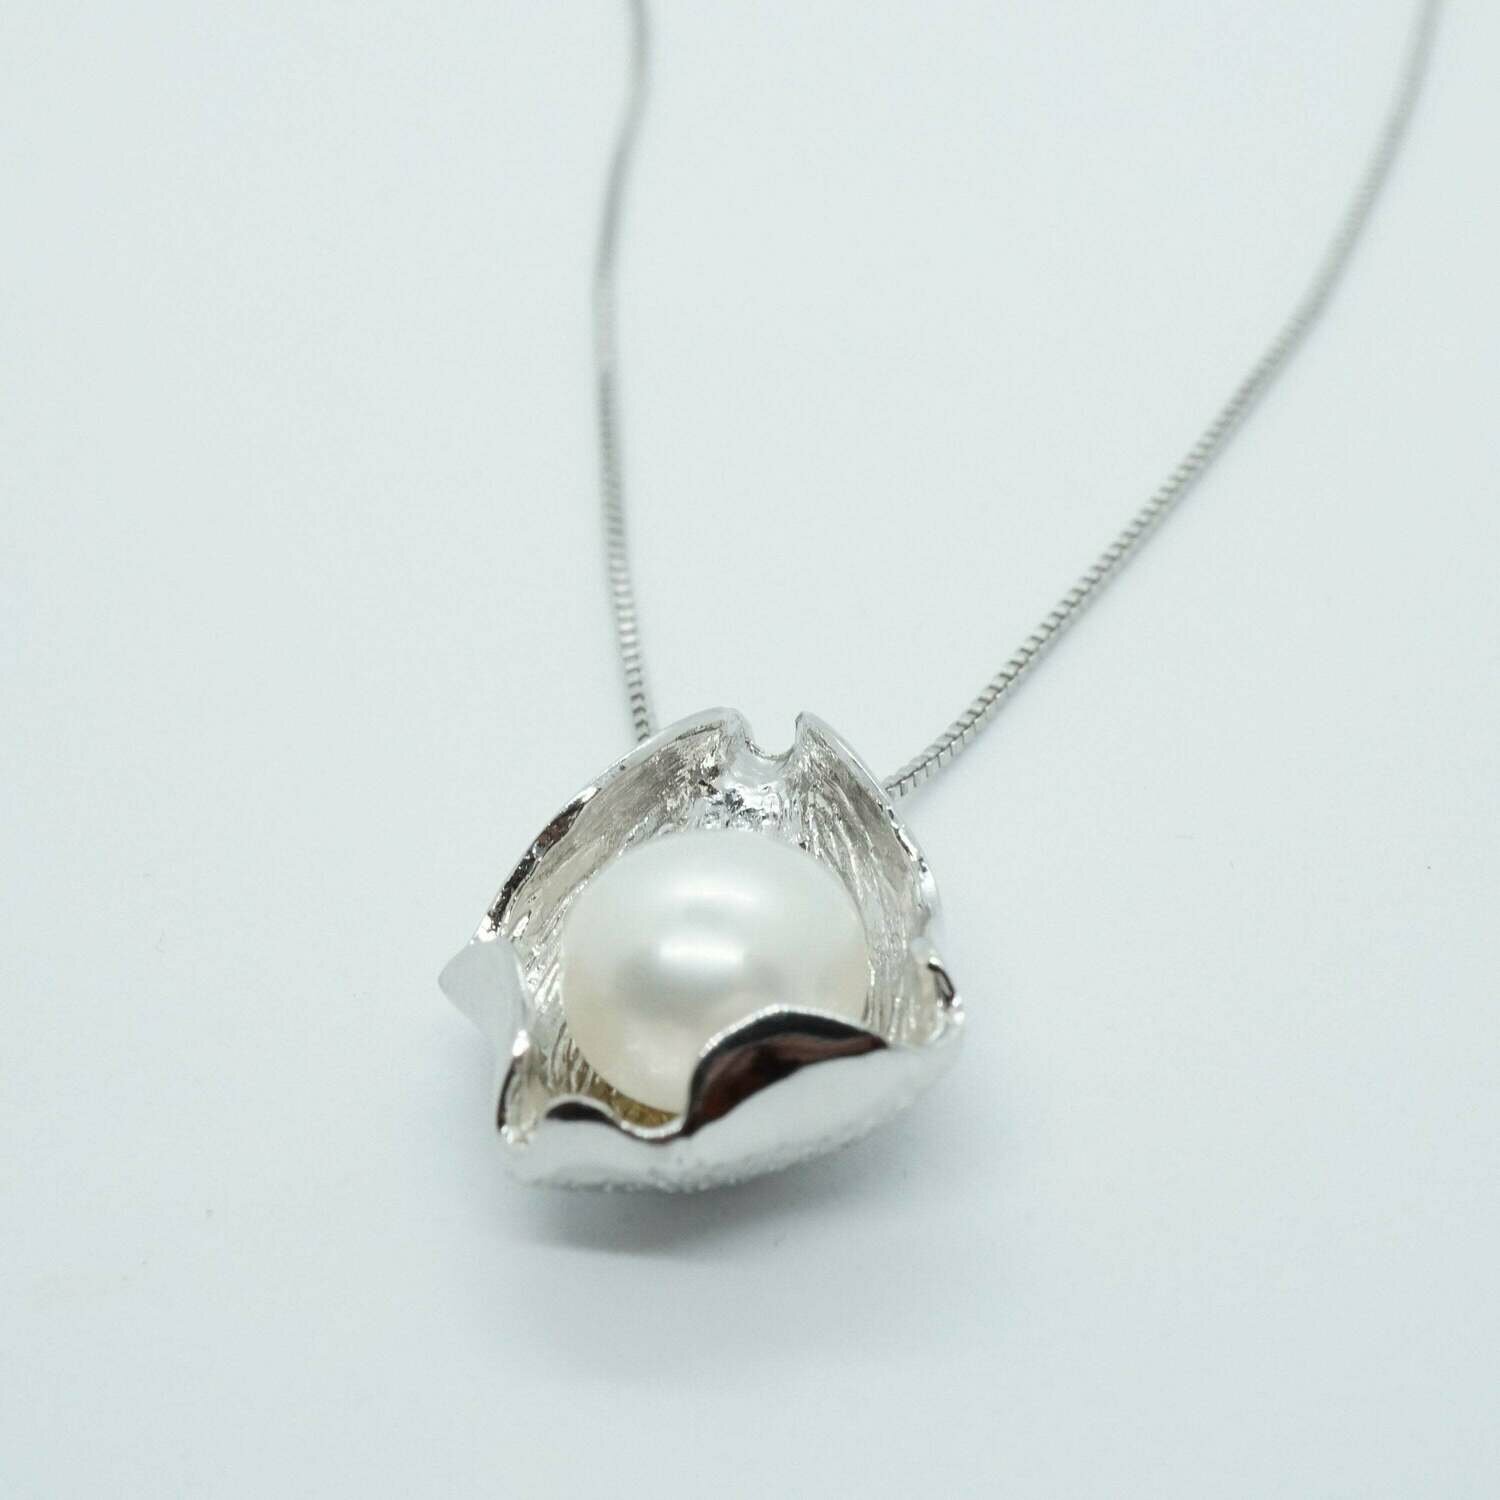 Diana X - Freshwater Pearl in a Shell Necklace